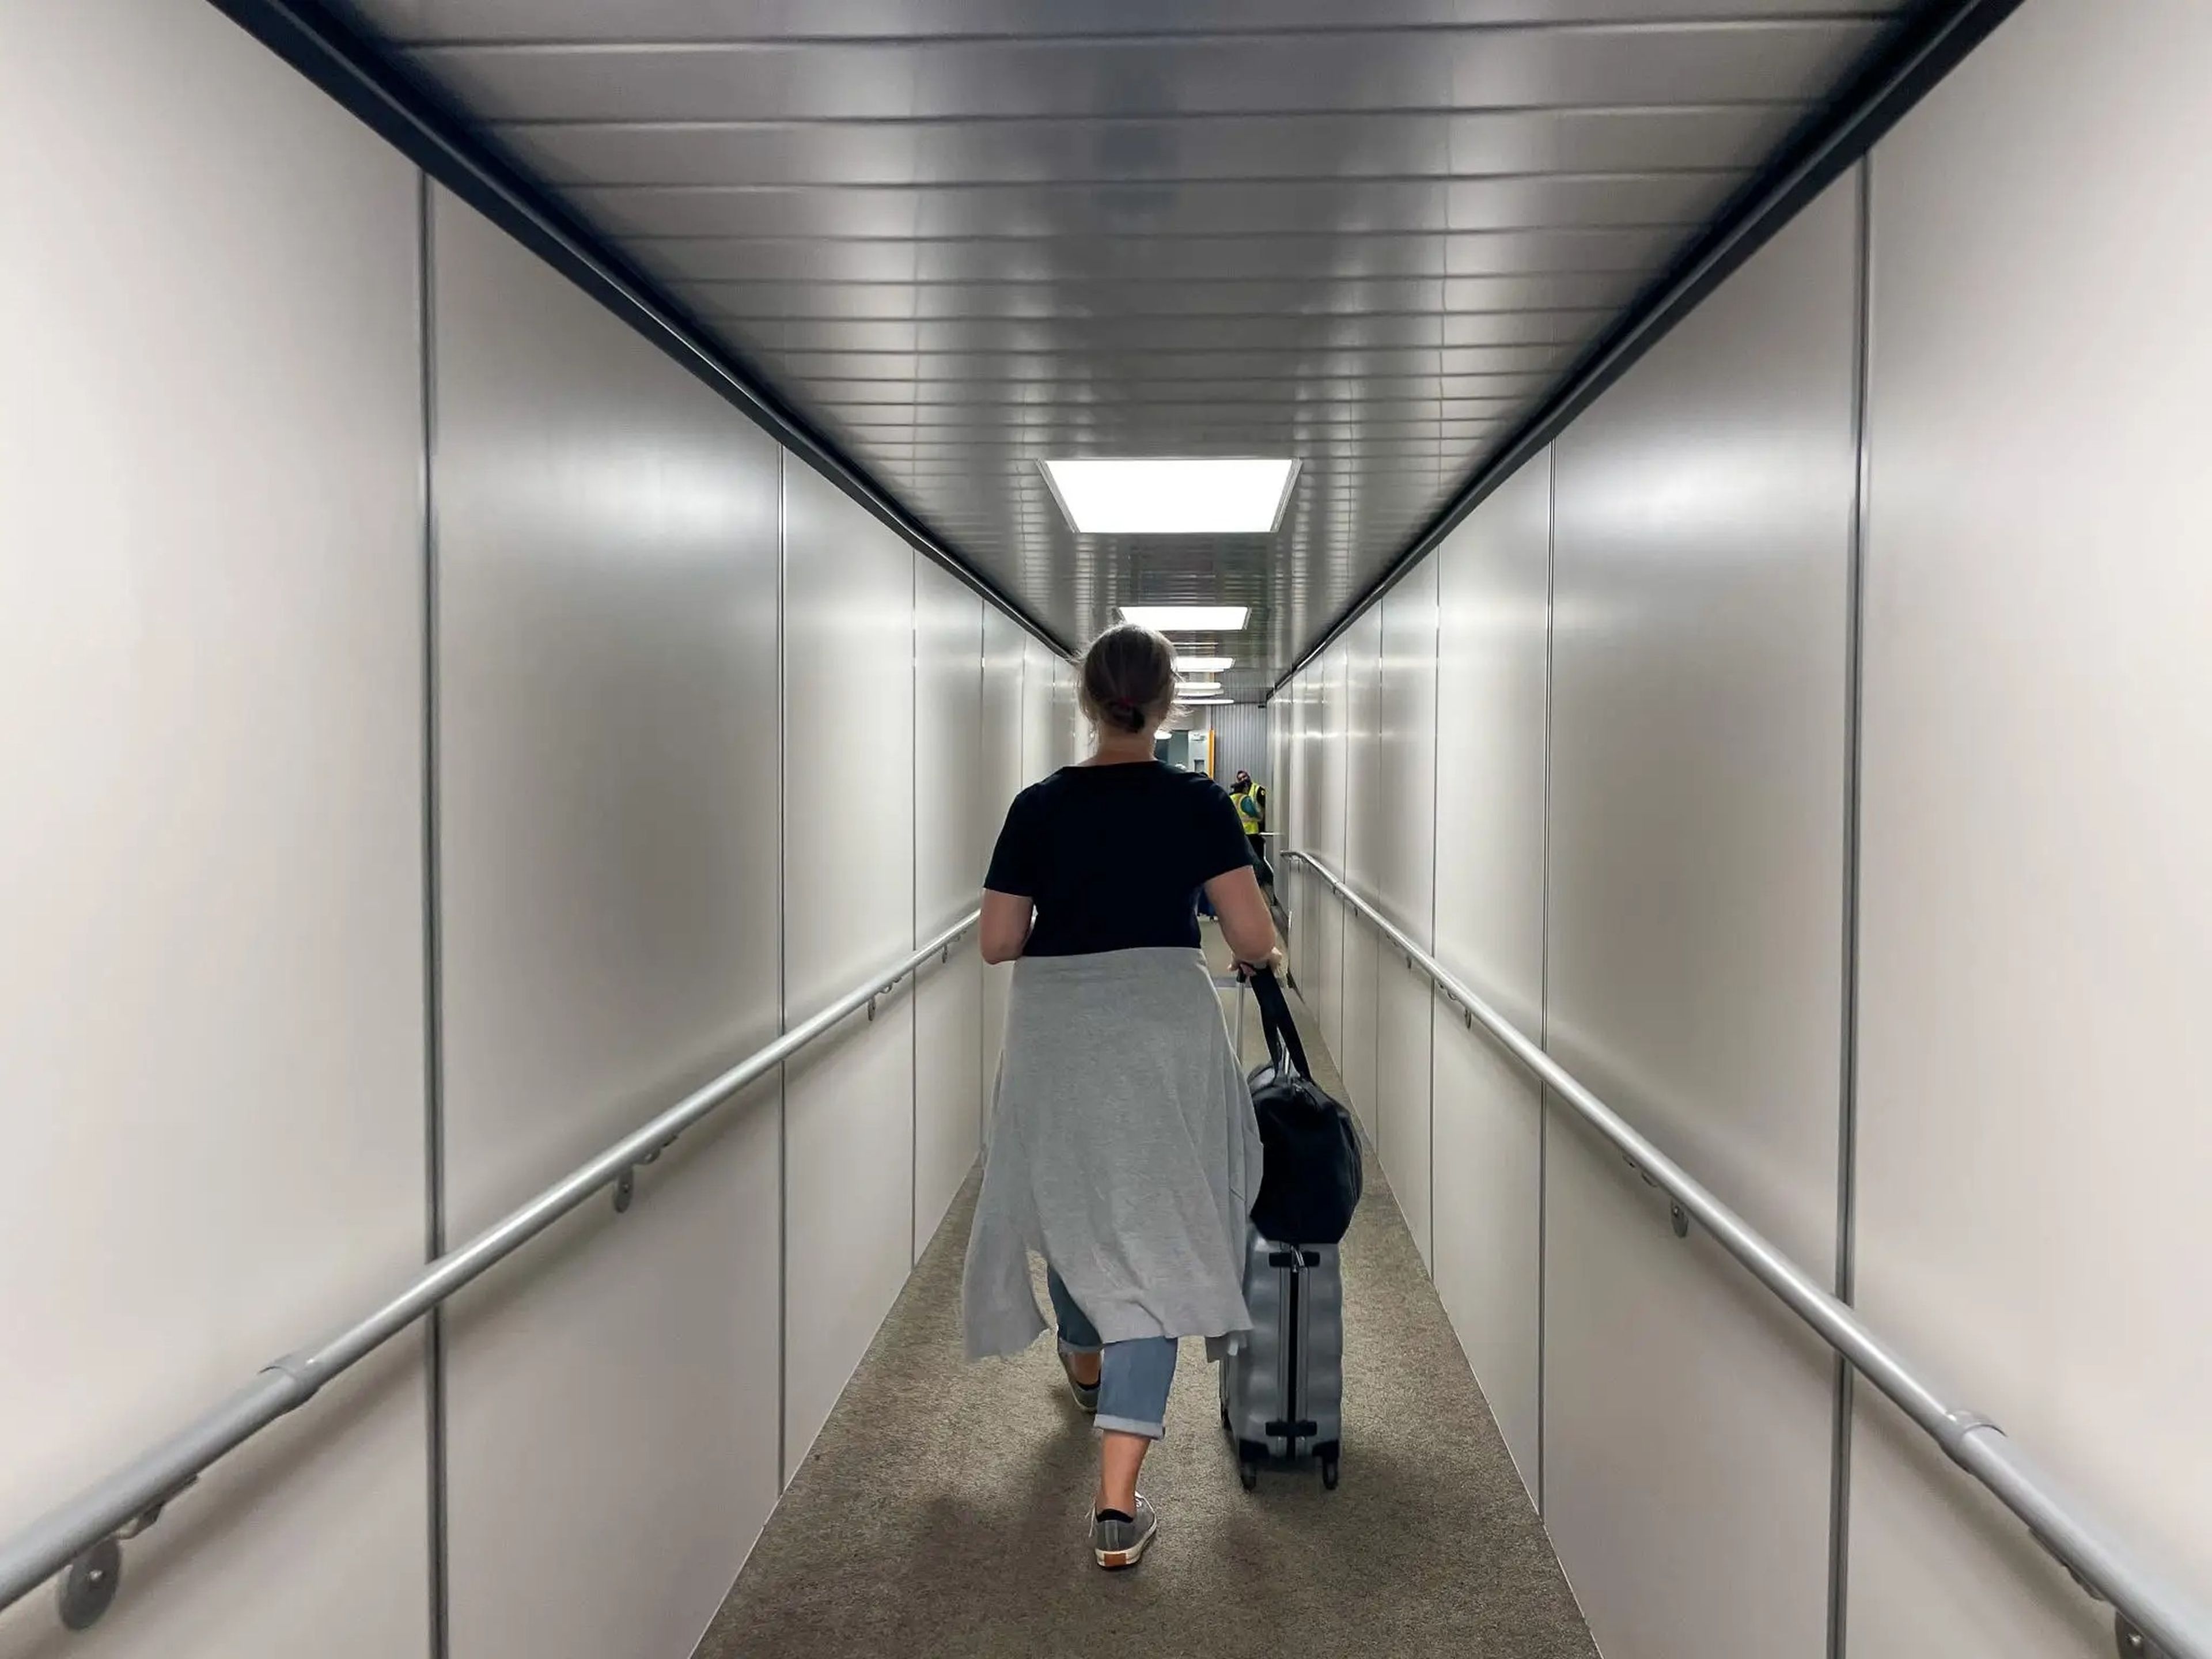 Insider's author entered a nearly empty jet bridge when she boarded the Air New Zealand flight.